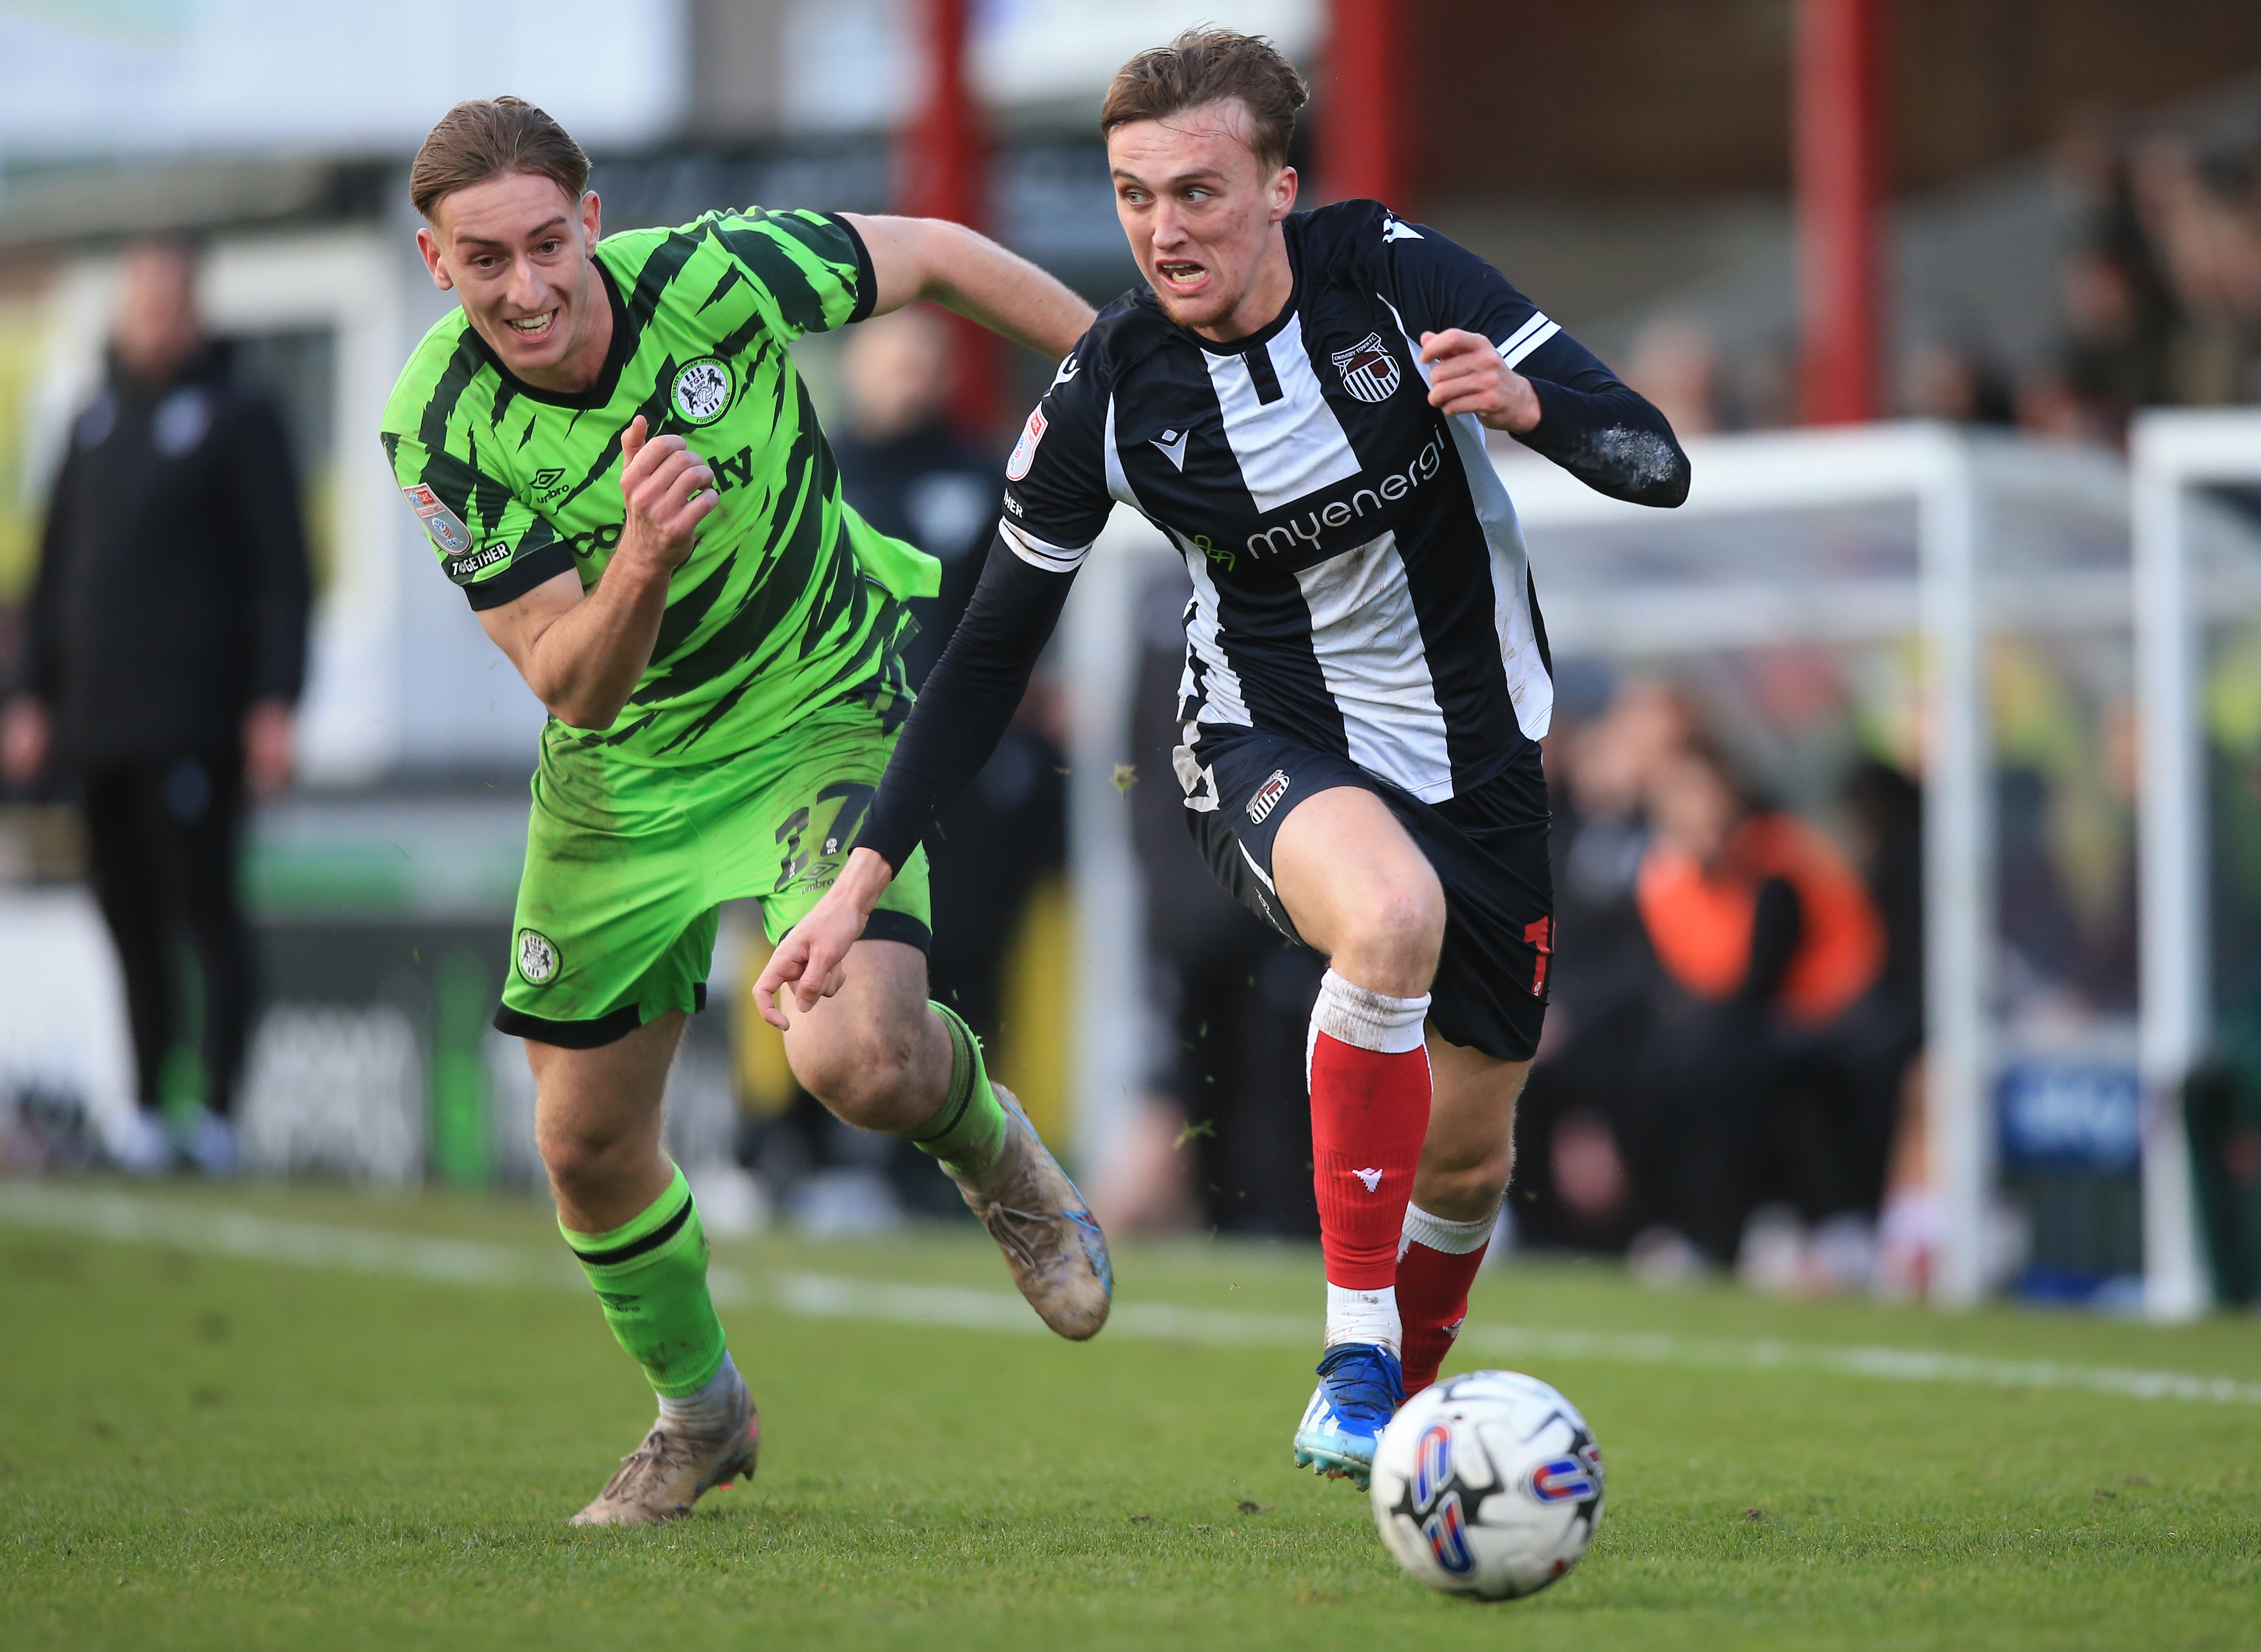 Jamie Andrews in action for Grimsby Town wearing their home kit 